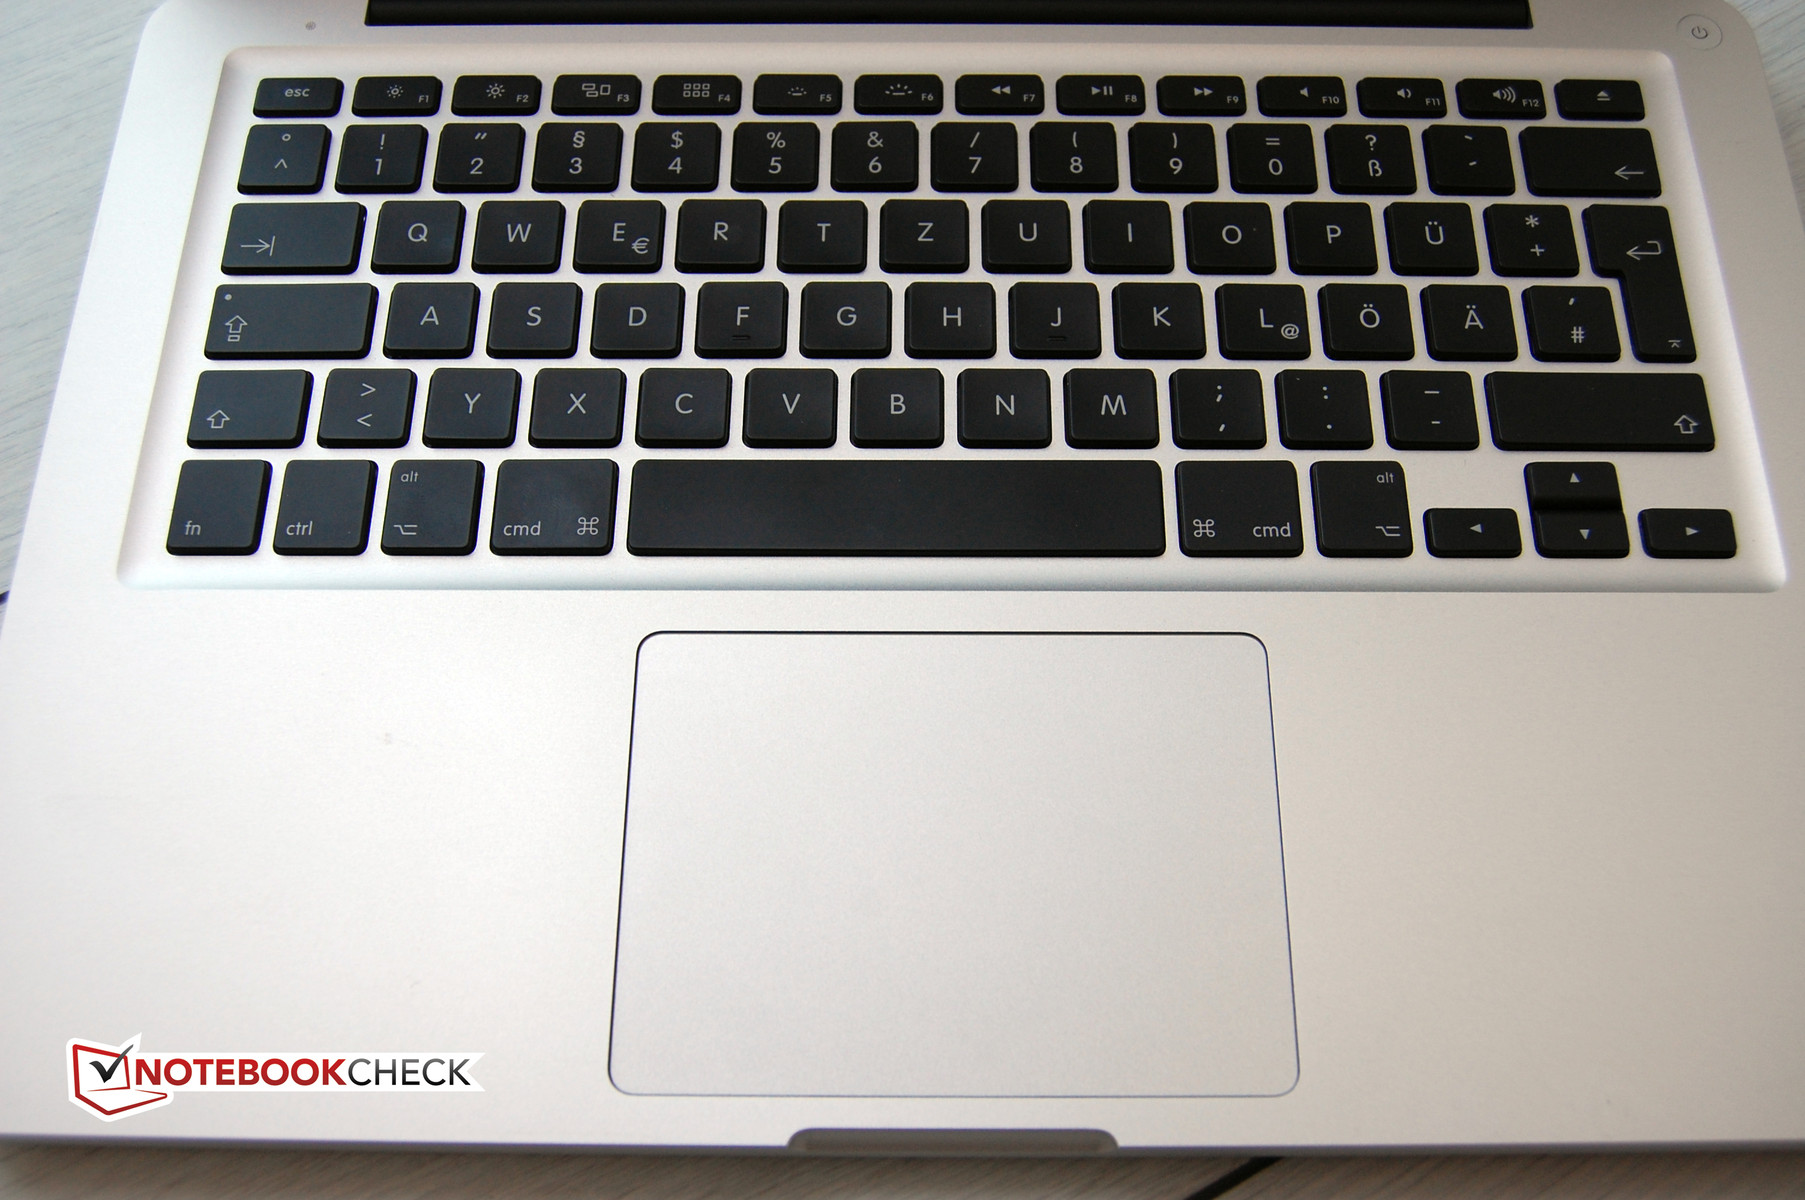 Review Apple MacBook Pro 13 2.5 GHz Mid 2012 Notebook